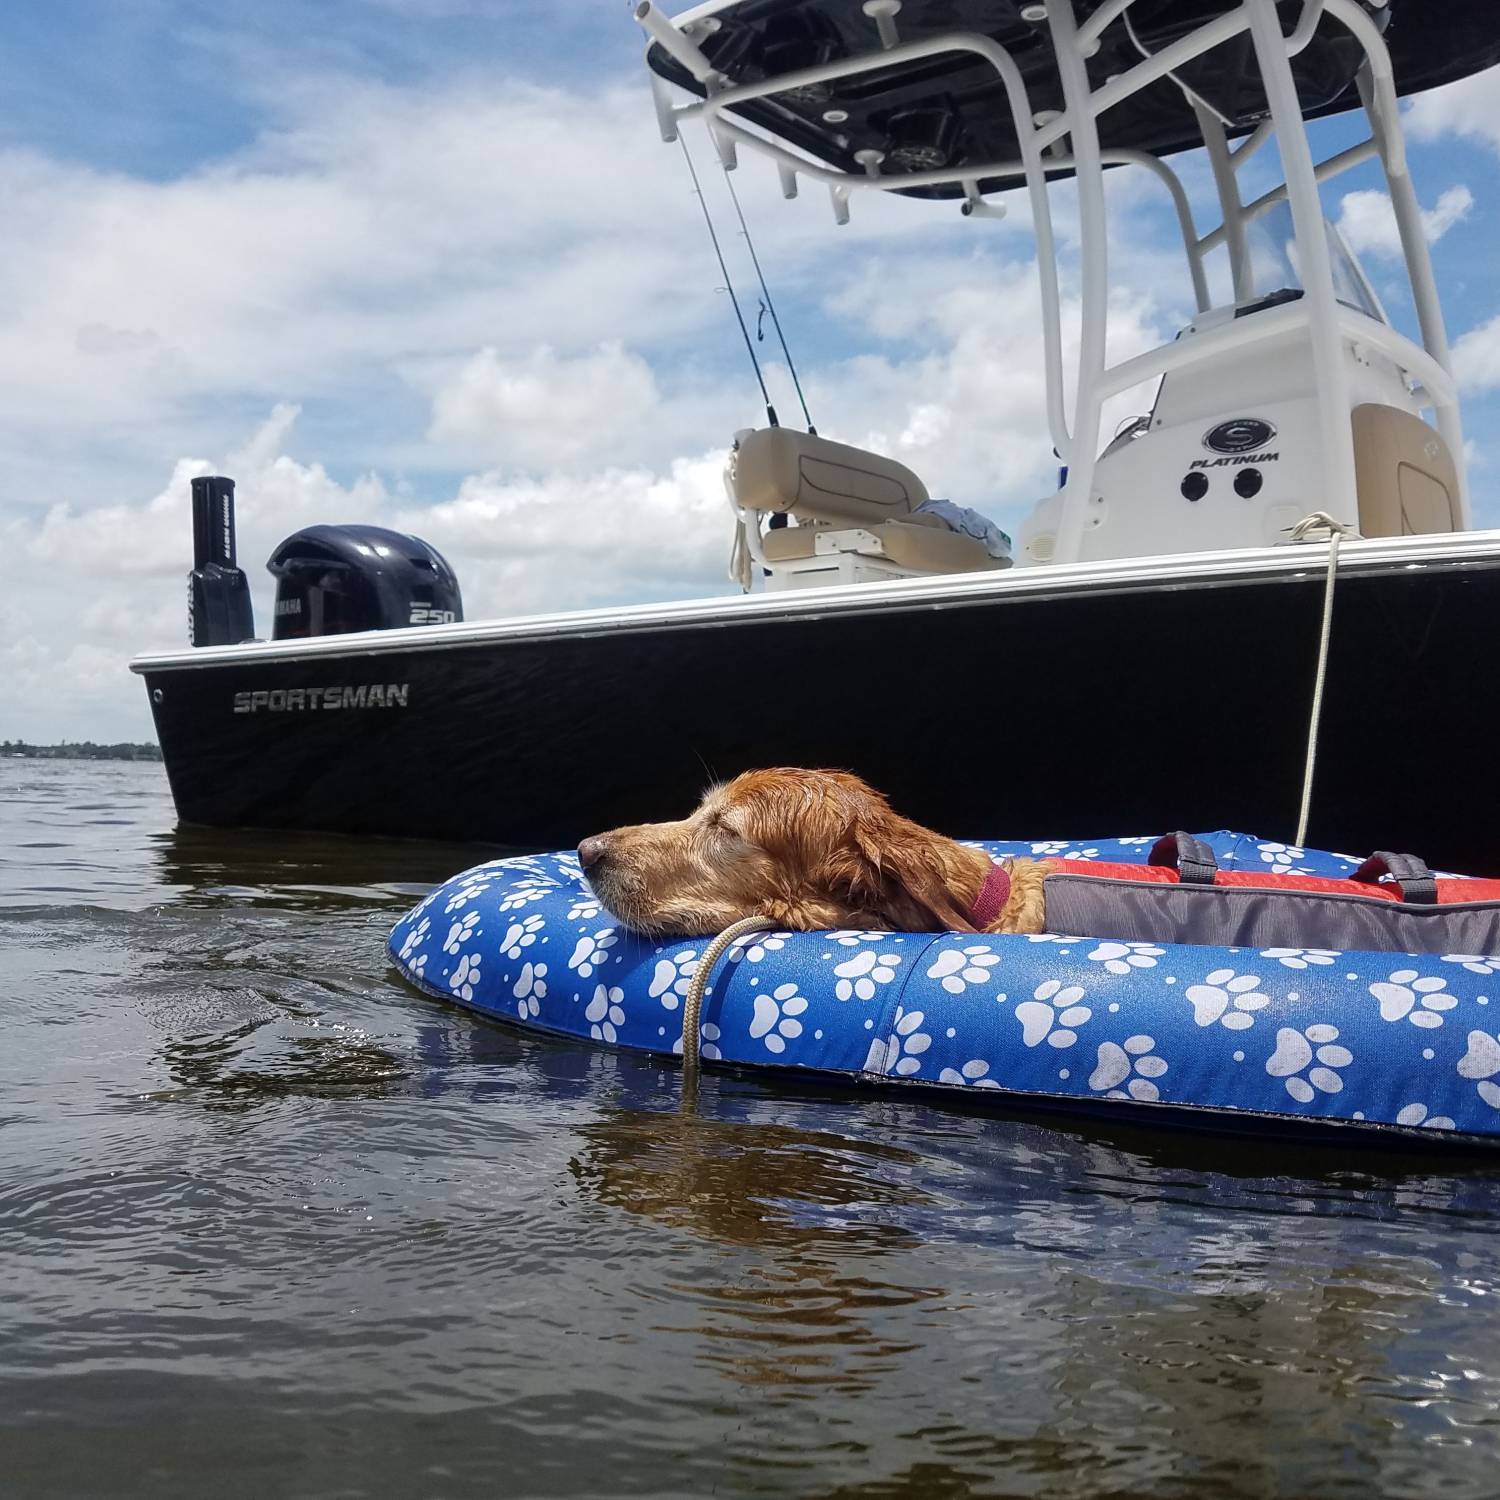 Title: Our Roxie! May she rest in peace! - On board their Sportsman Masters 247 Bay Boat - Location: Lake Dora, Fl. Participating in the Photo Contest #SportsmanSeptember